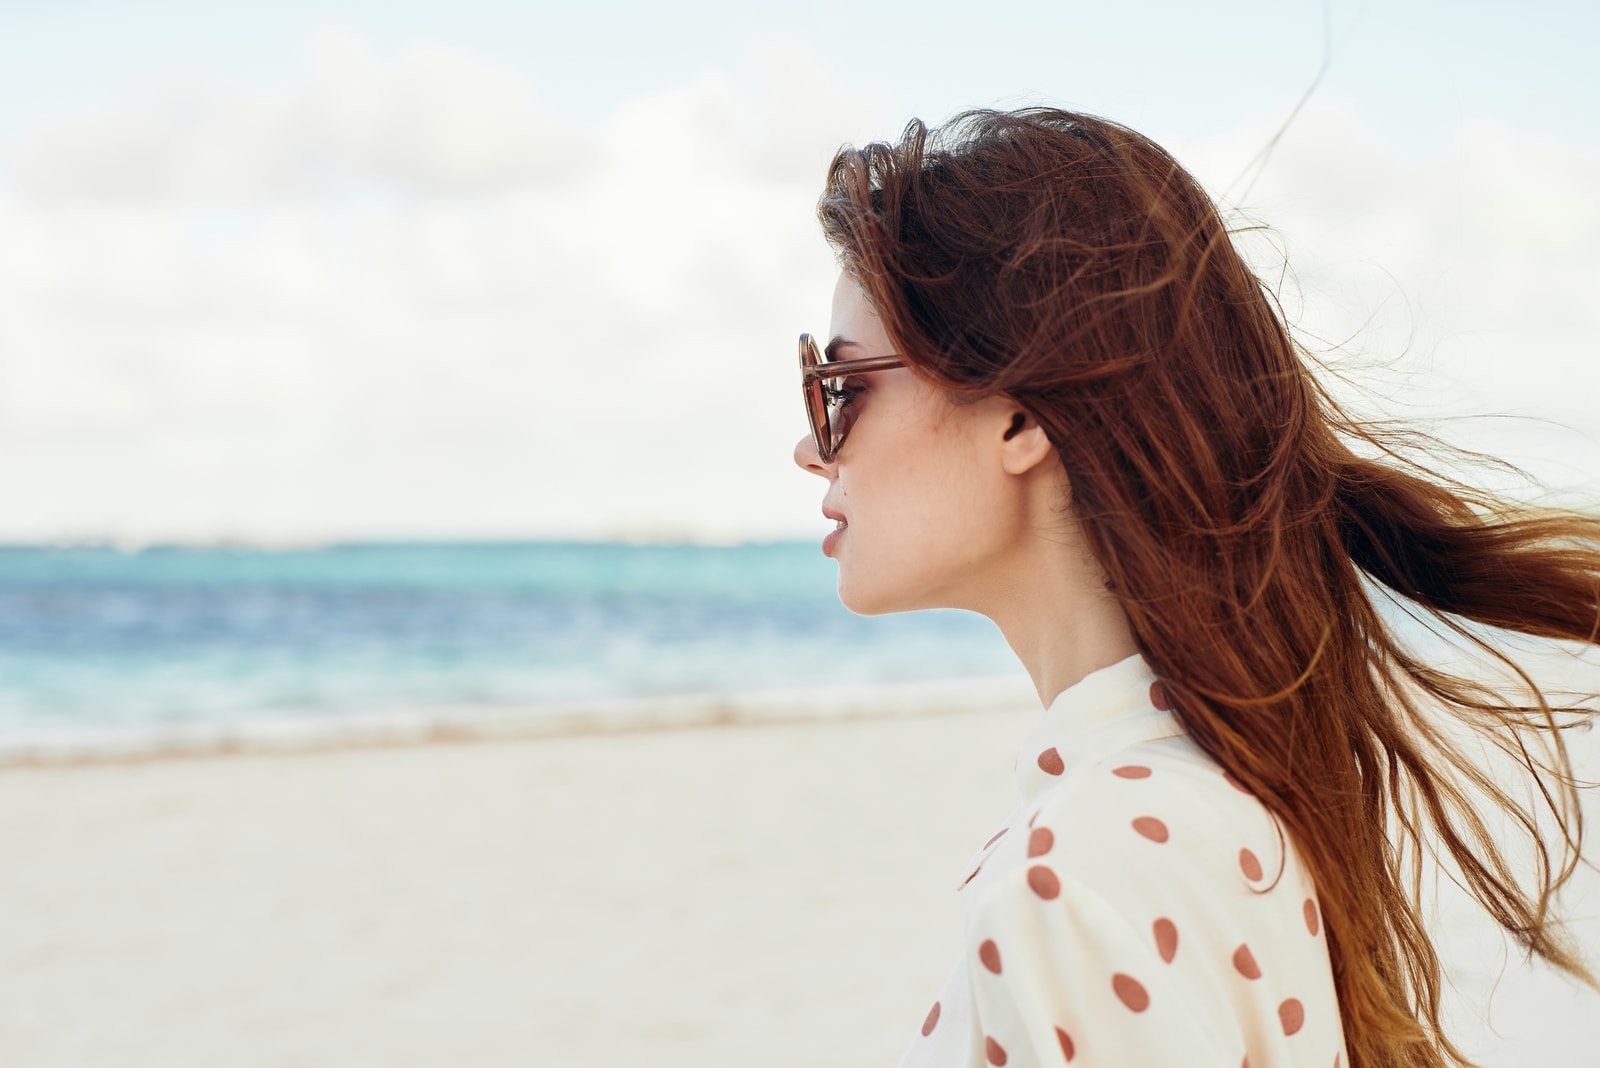 a woman with long brown hair and glasses looks away